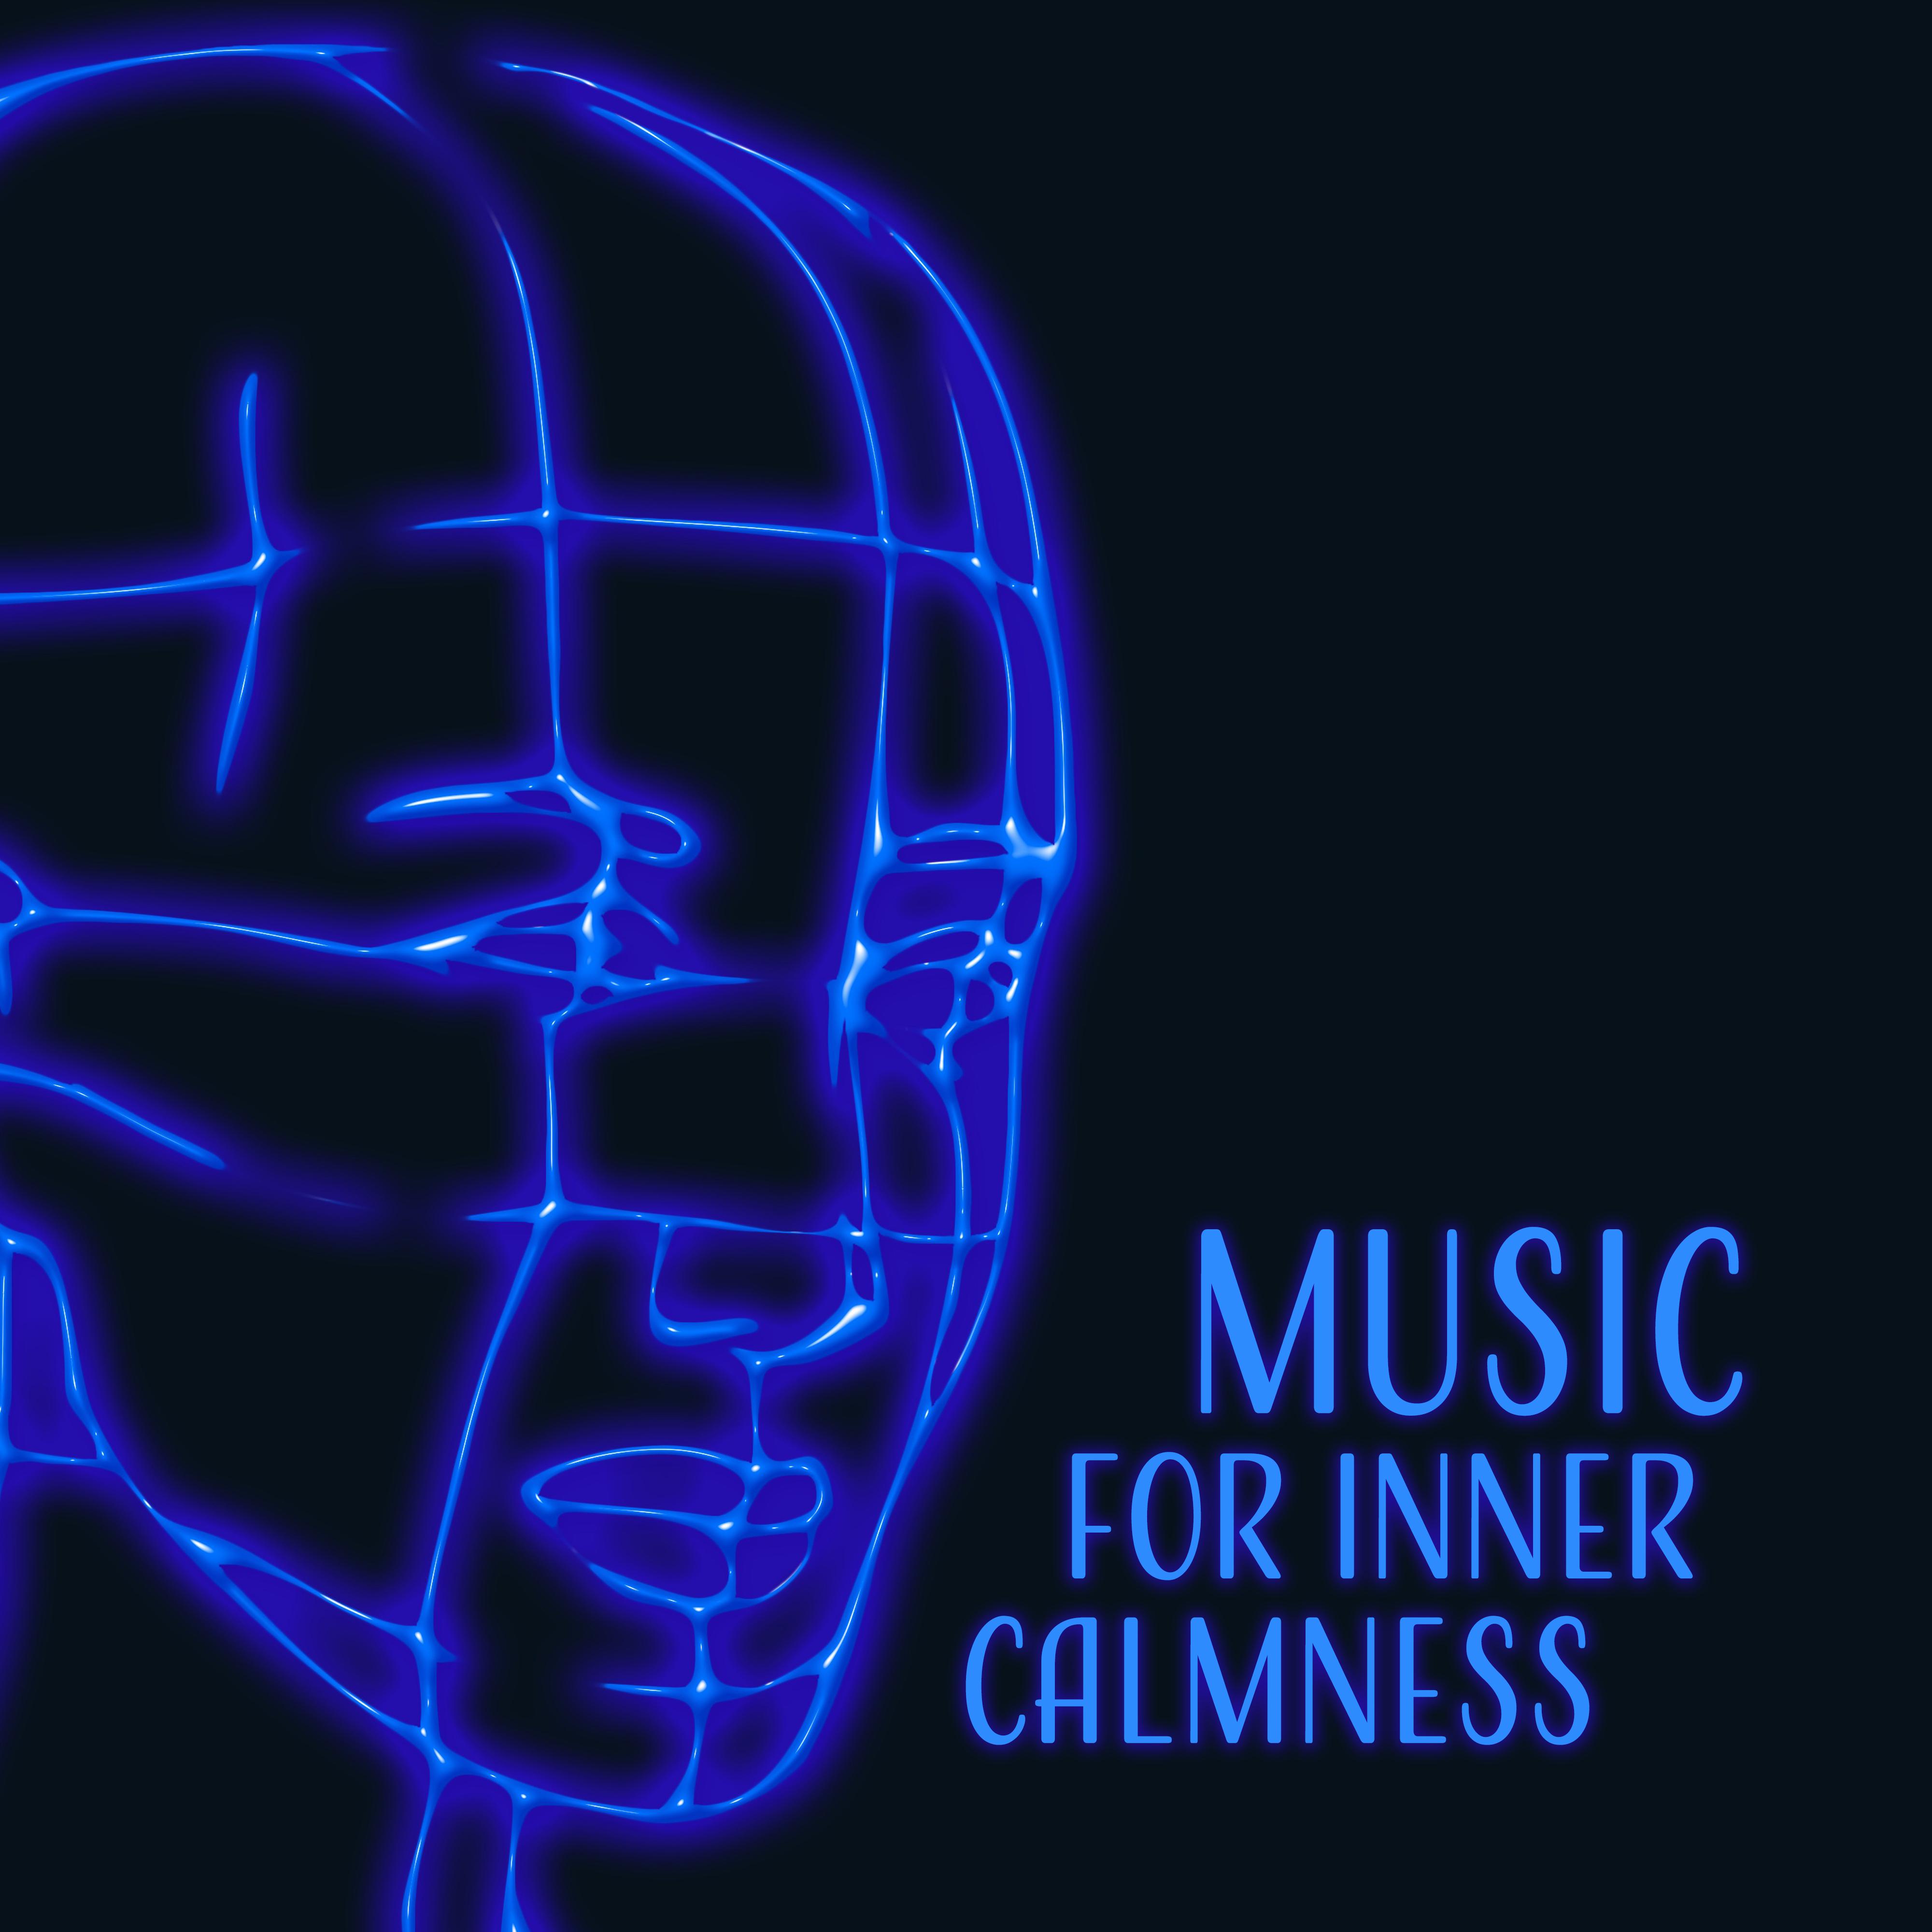 Music for Inner Calmness – Stress Relief, Calming Sounds, New Age Healing Therapy, Autumn Rest